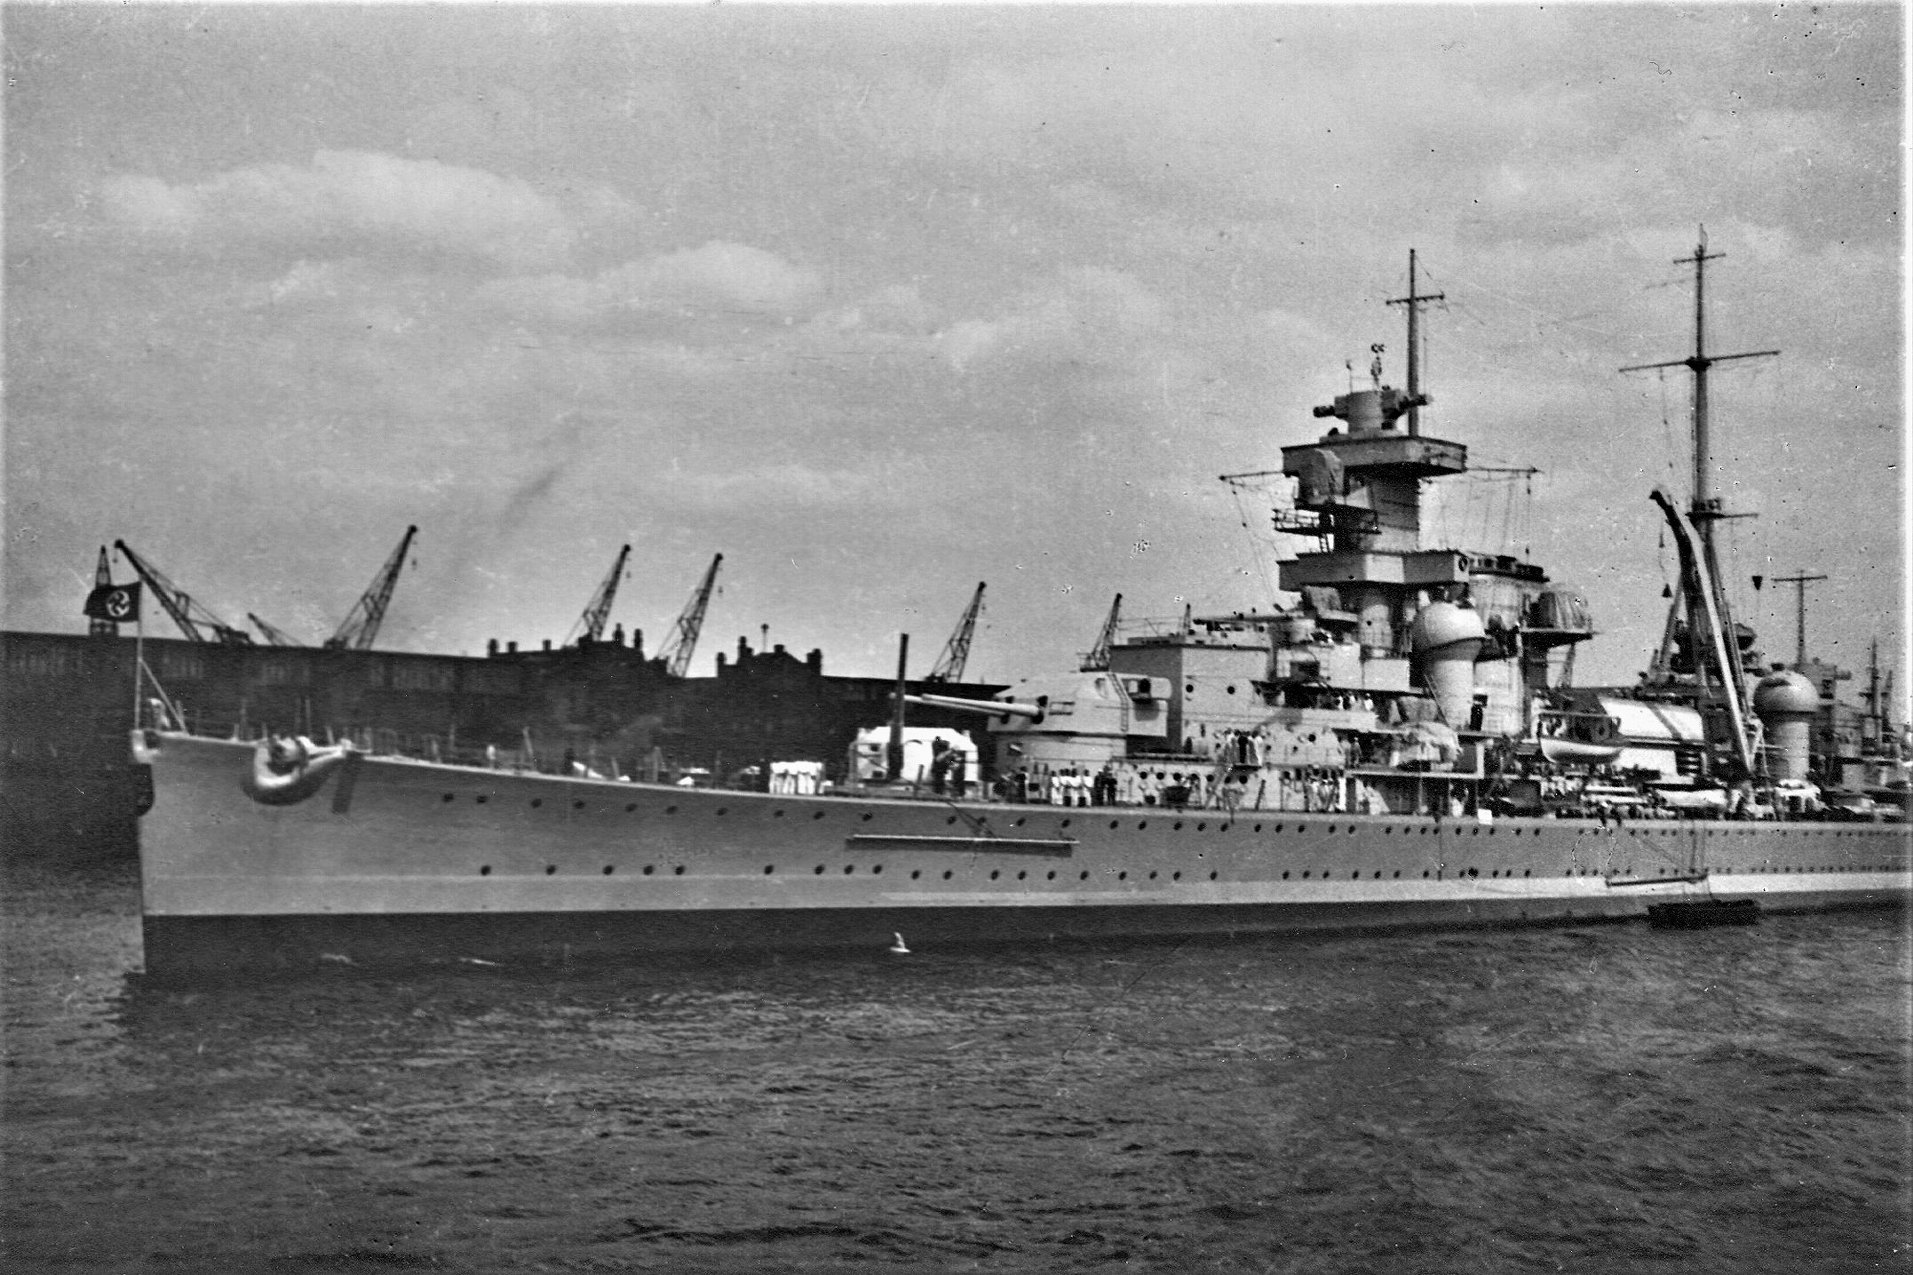 Admiral Hipper Bathing Suit All in one Photos.